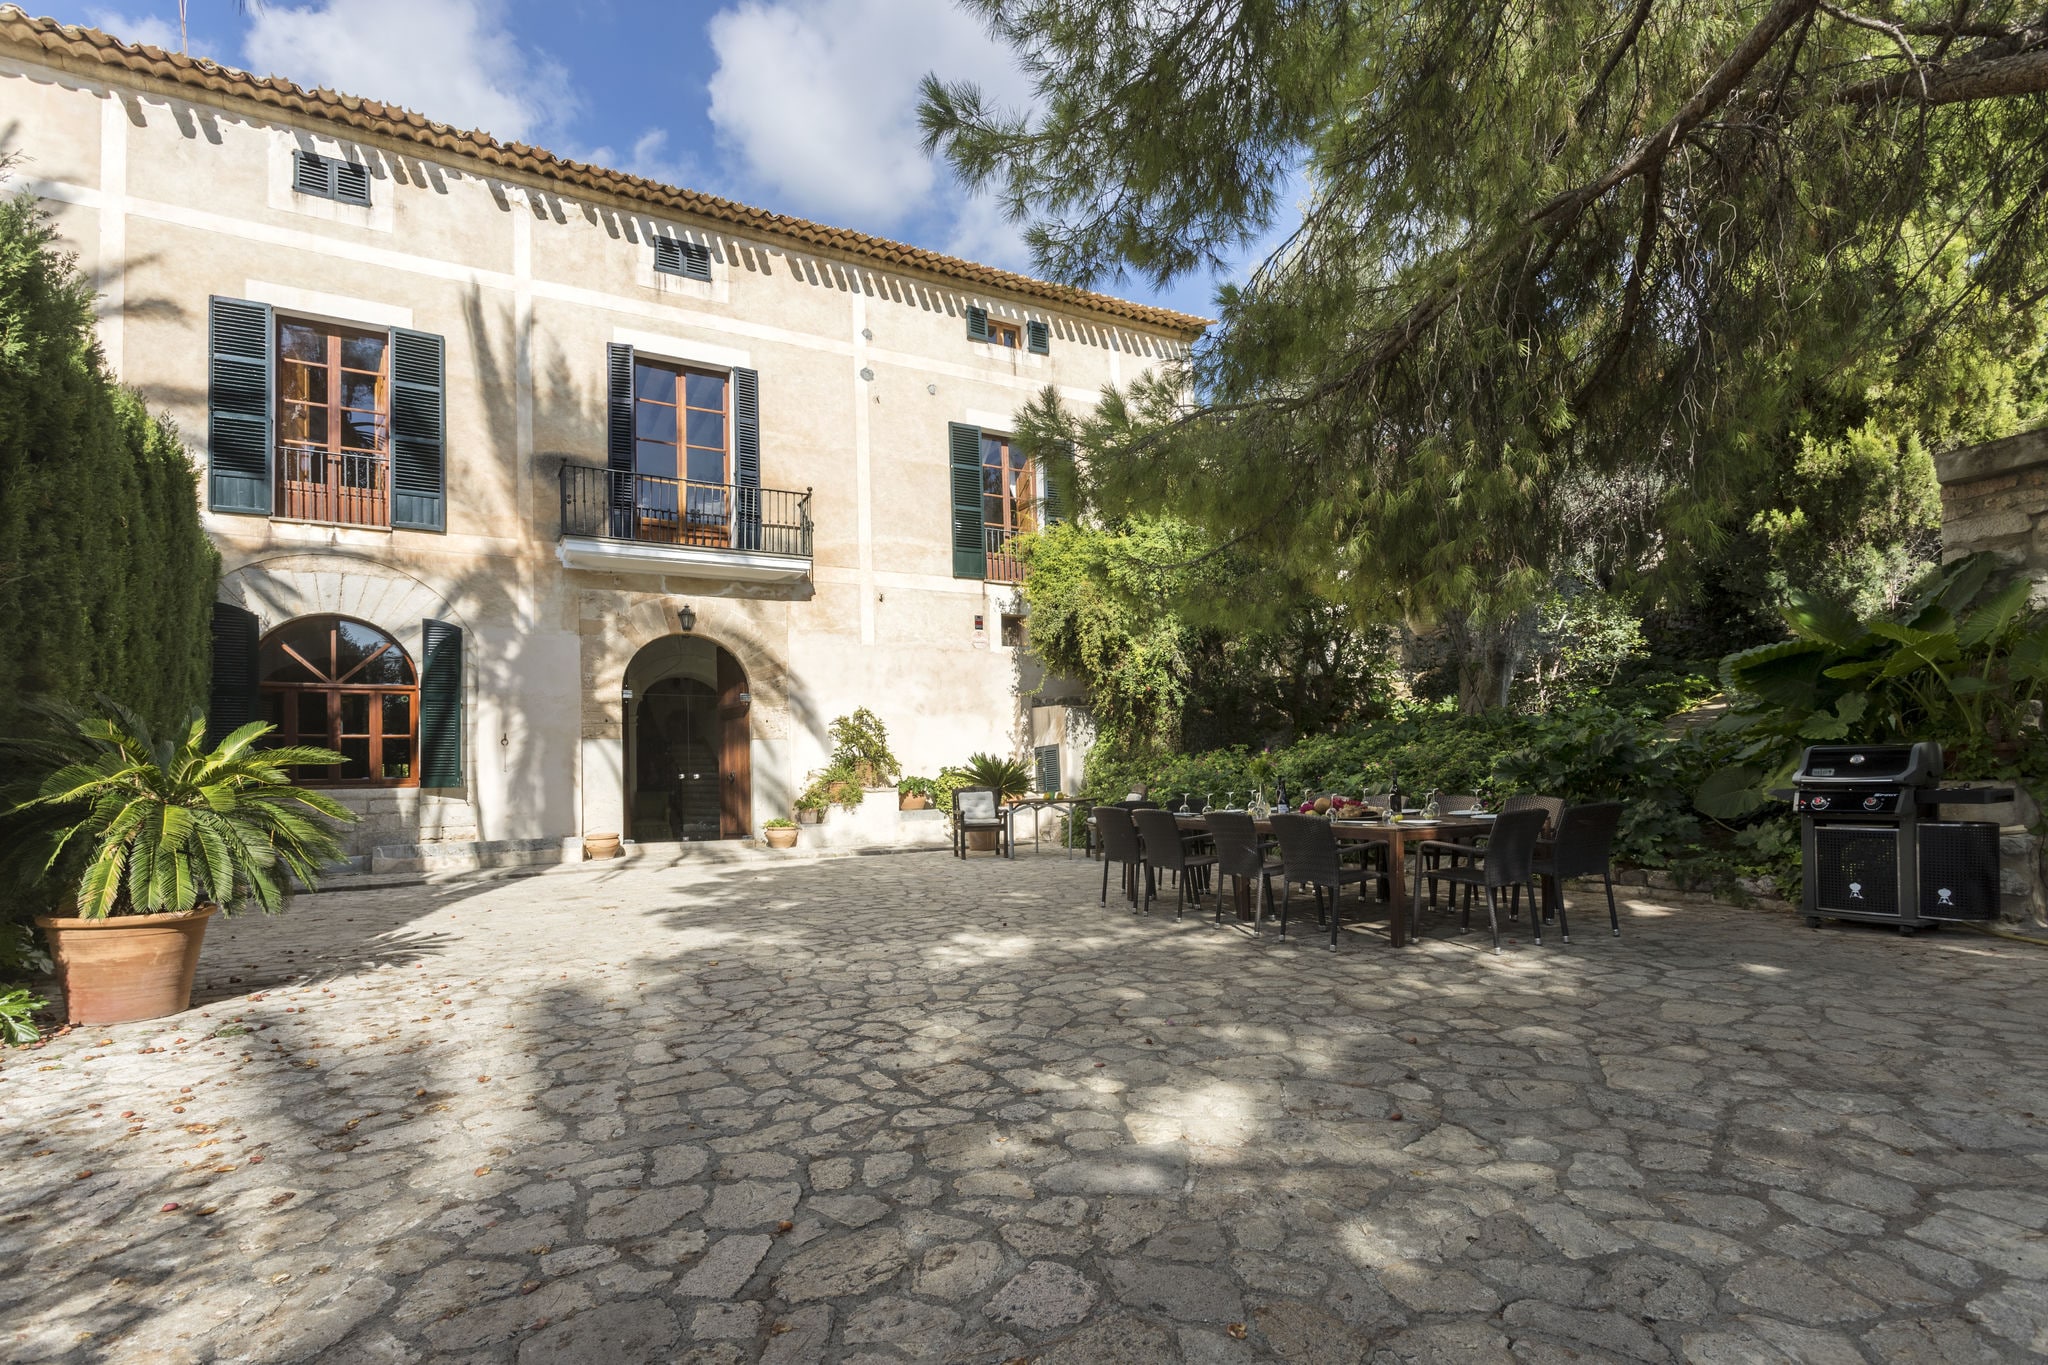 Large 18-century stylish manor house at the foot of the Tramuntana mountains